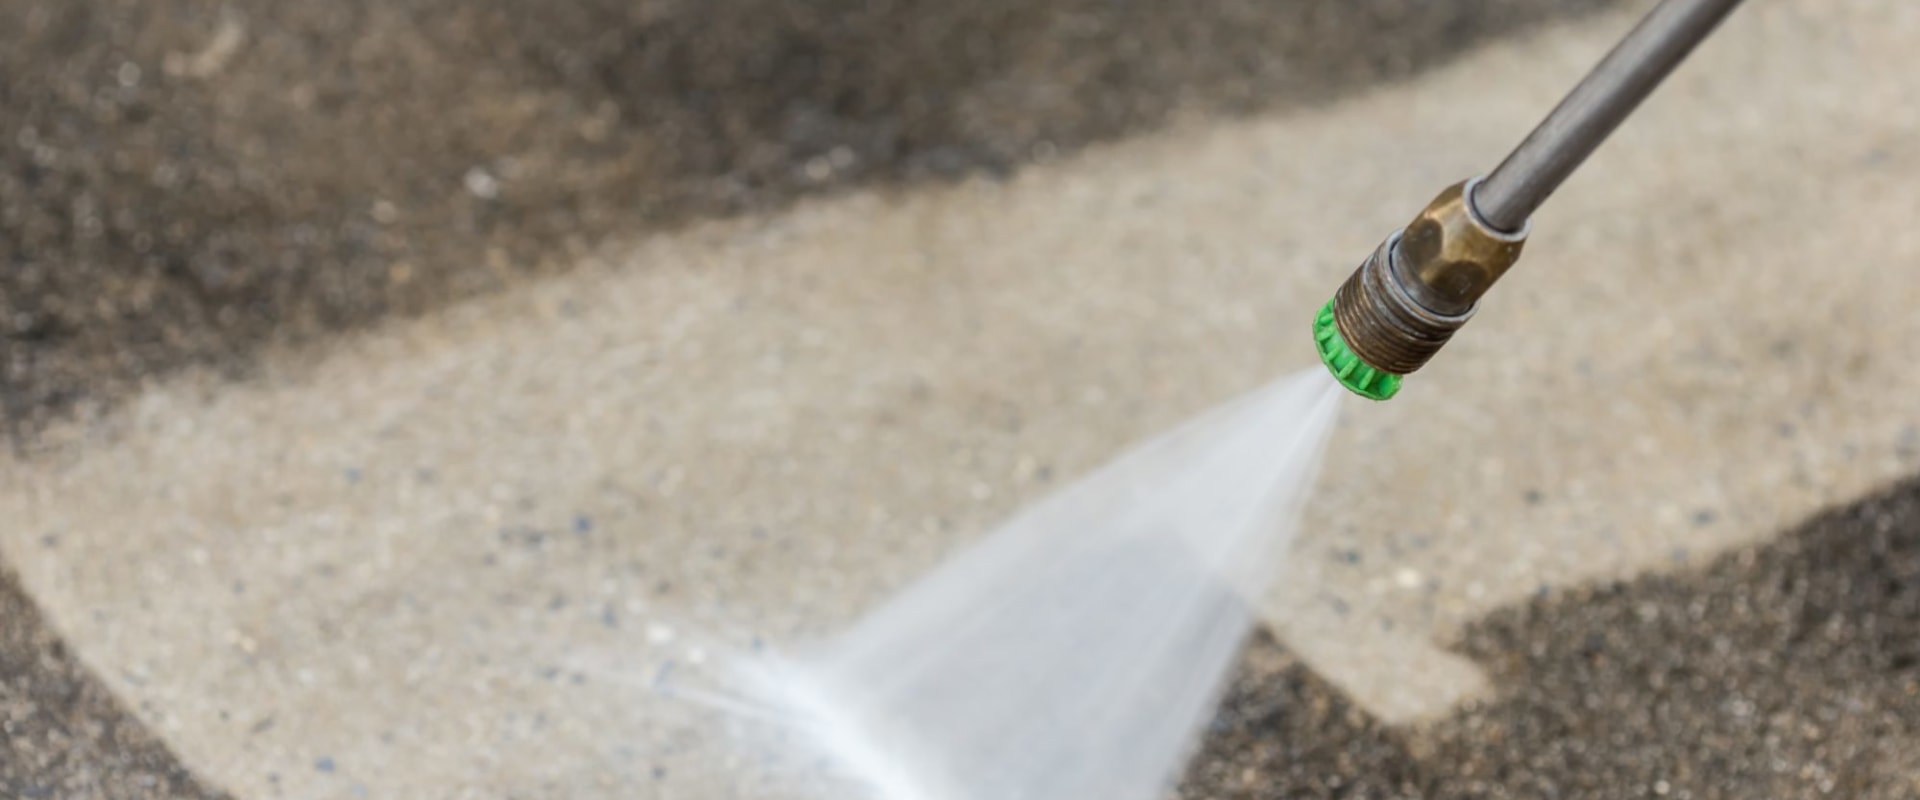 What Type of Nozzle is Best for Pressure Washing?